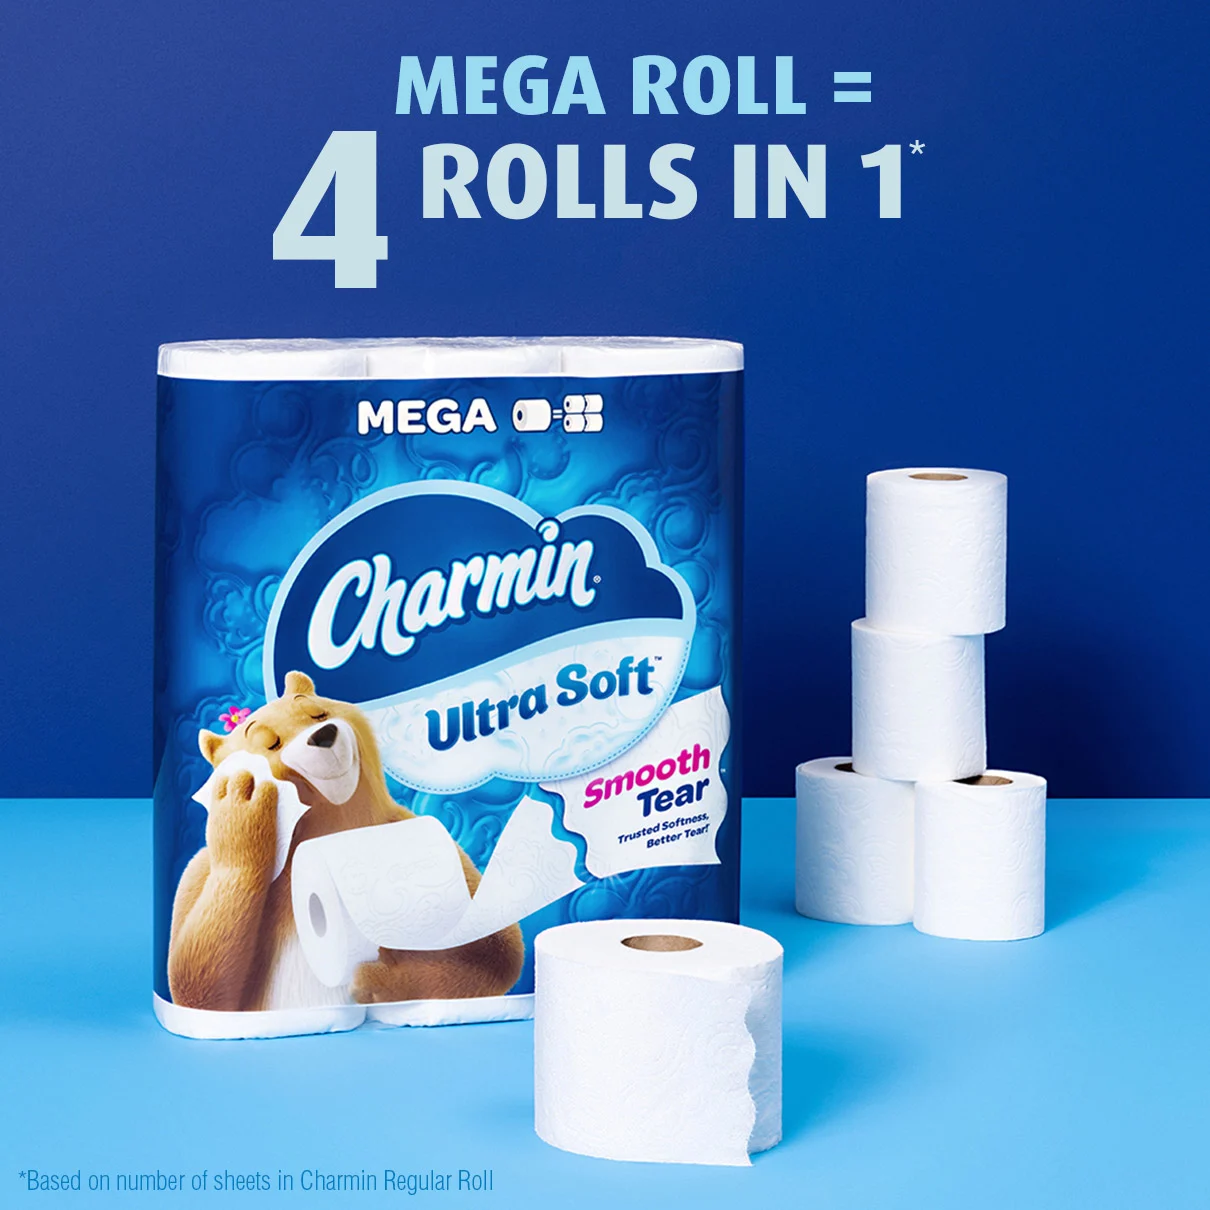 2x more absorbing soft toilet paper 1